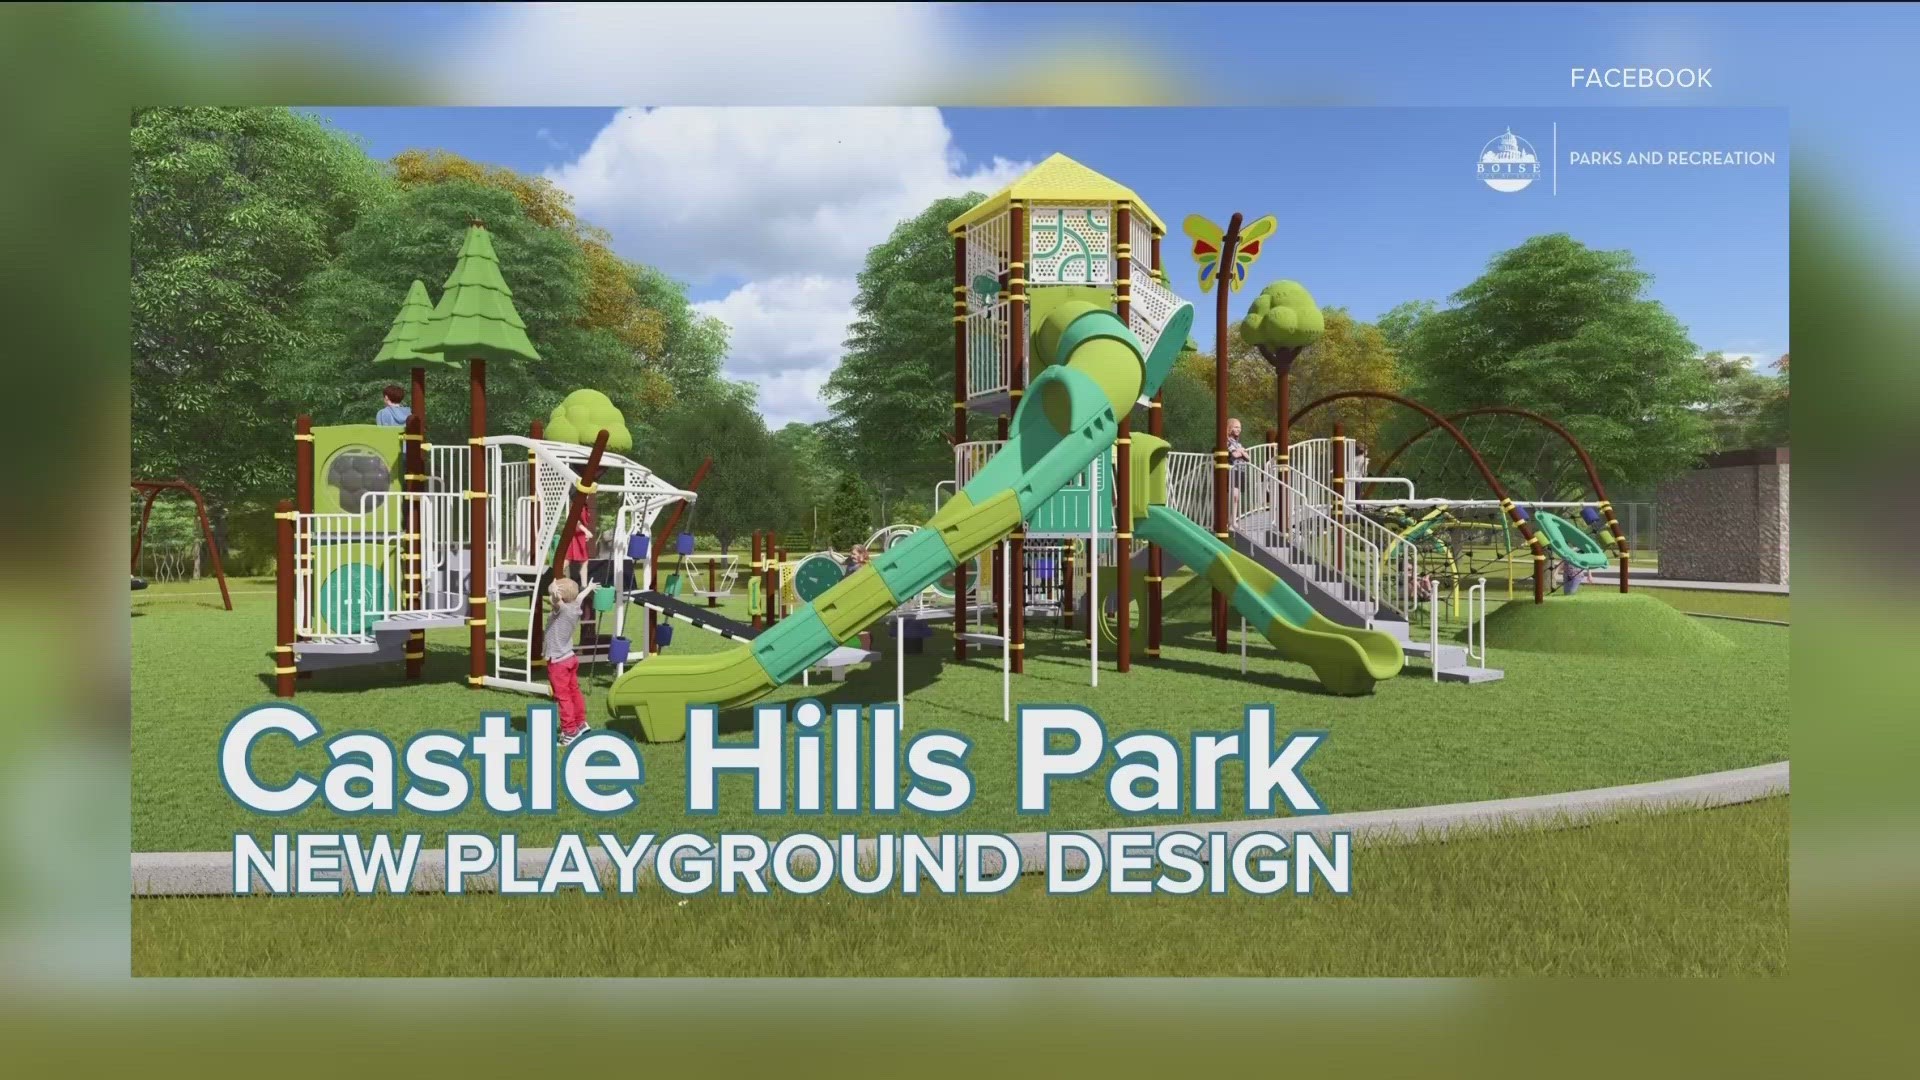 The public was able to vote on the final design, which received about 54% of the vote. The original park was destroyed by a fire back in early February.